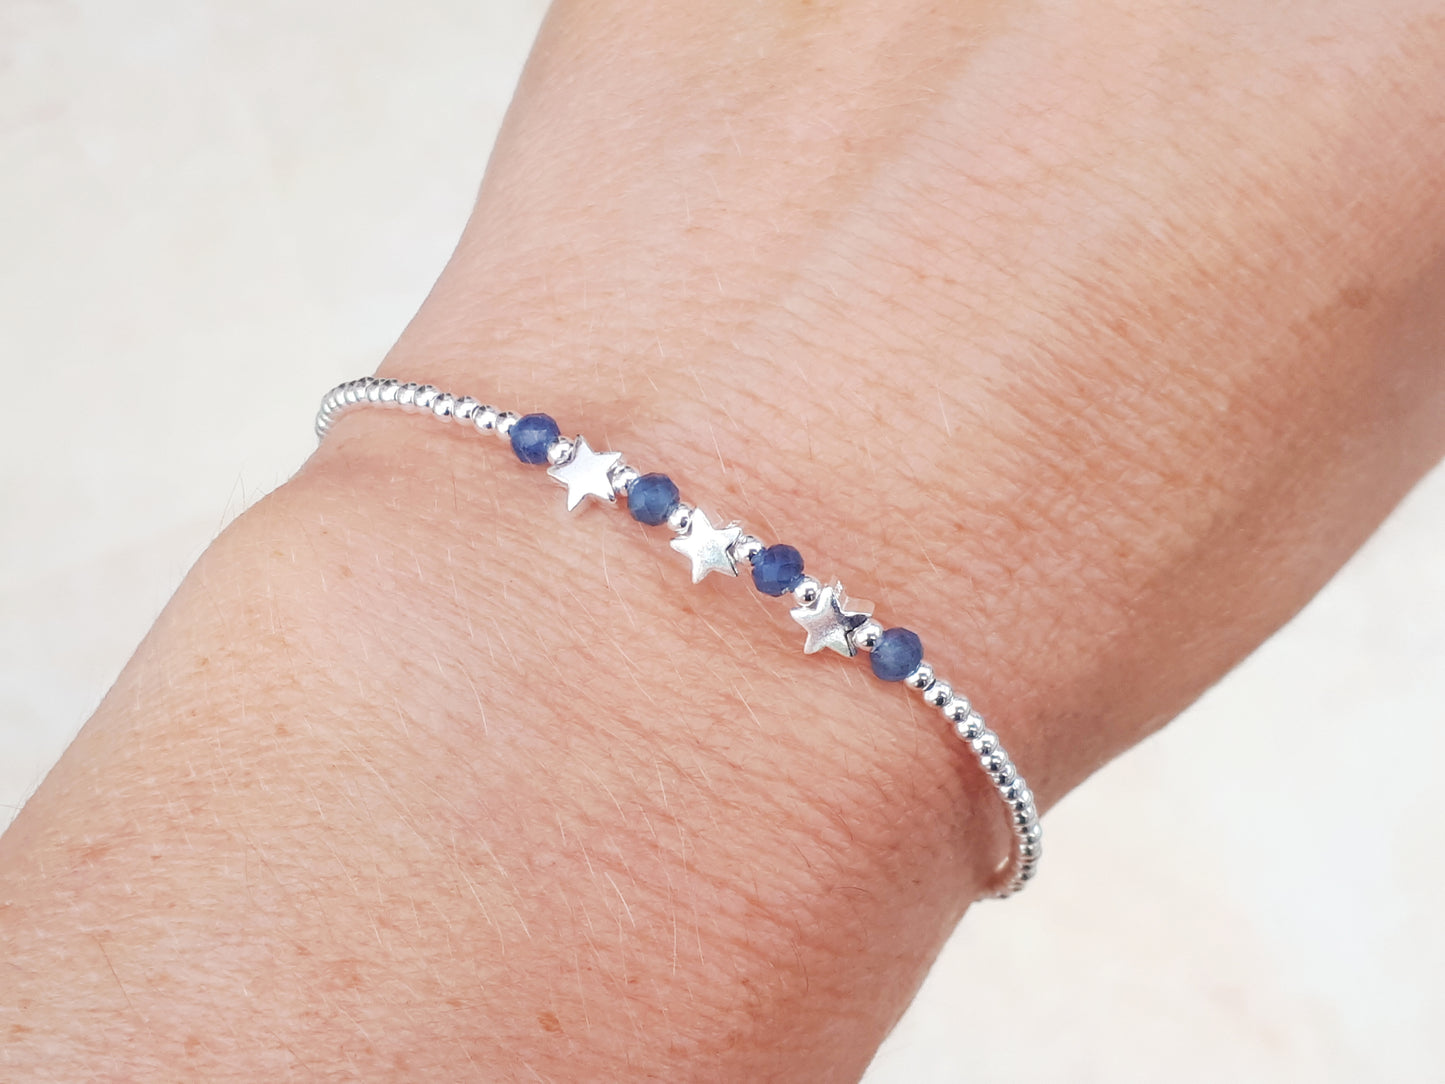 Sapphire bracelet sterling silver with optional personalised initial tag. September birthstone bracelet.